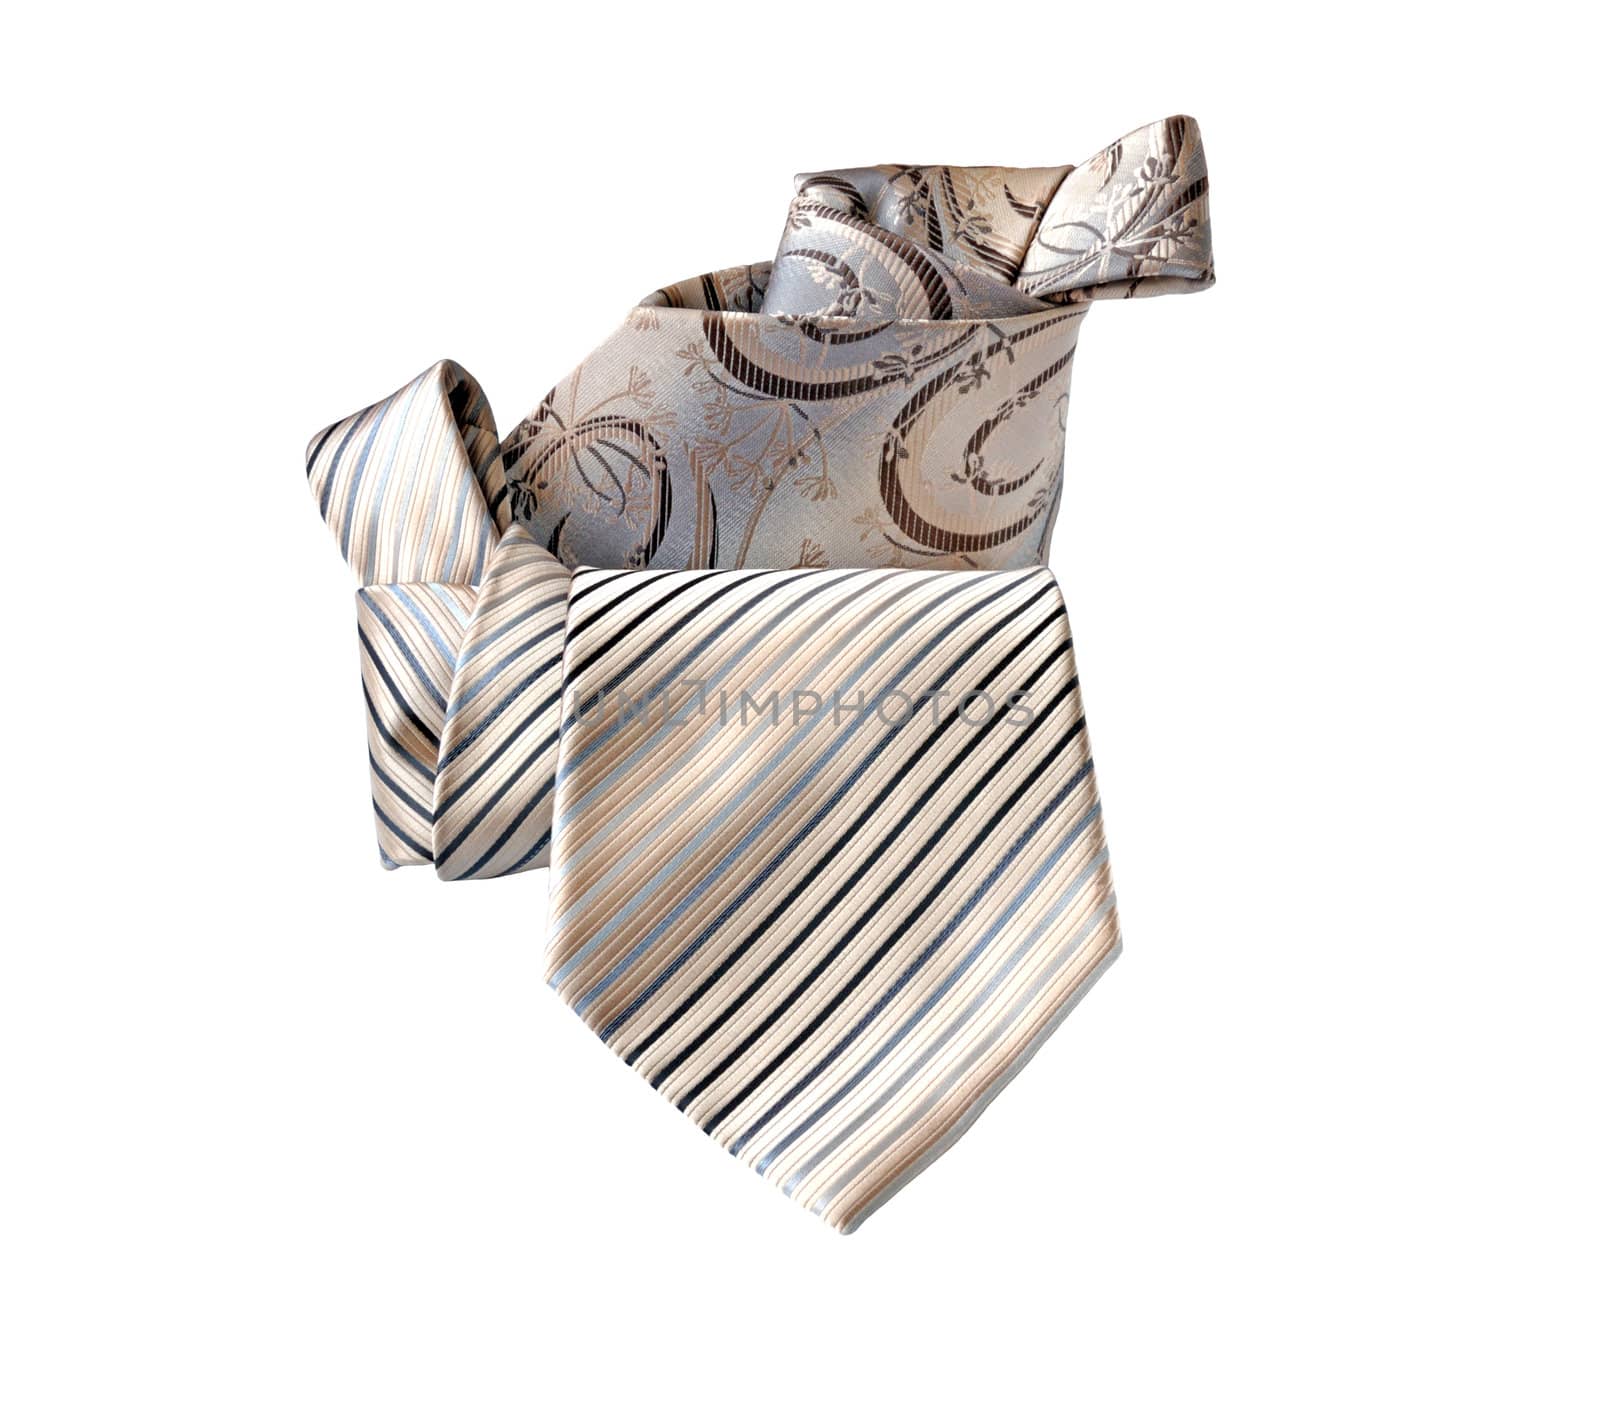 Two folded tie  by Apolonia